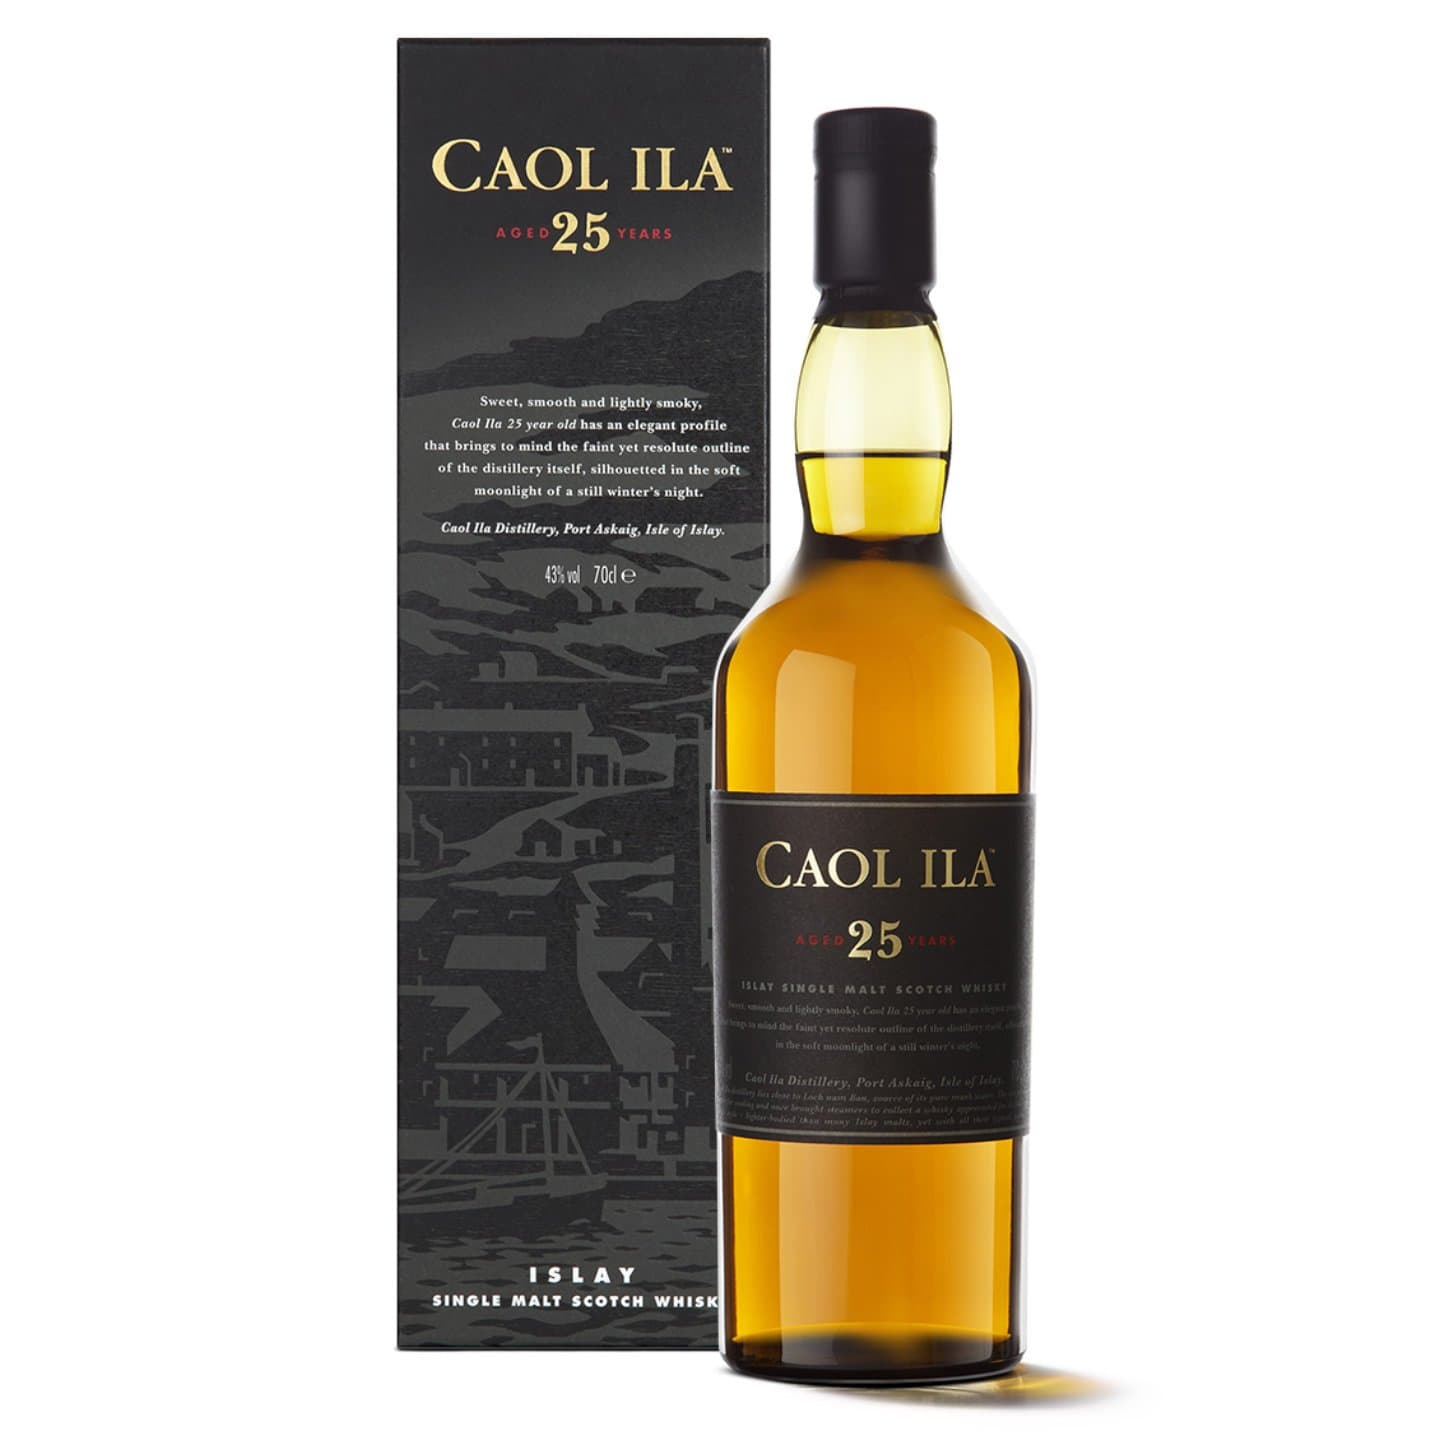 Caol Ila 25 Year Old Box And Bottle